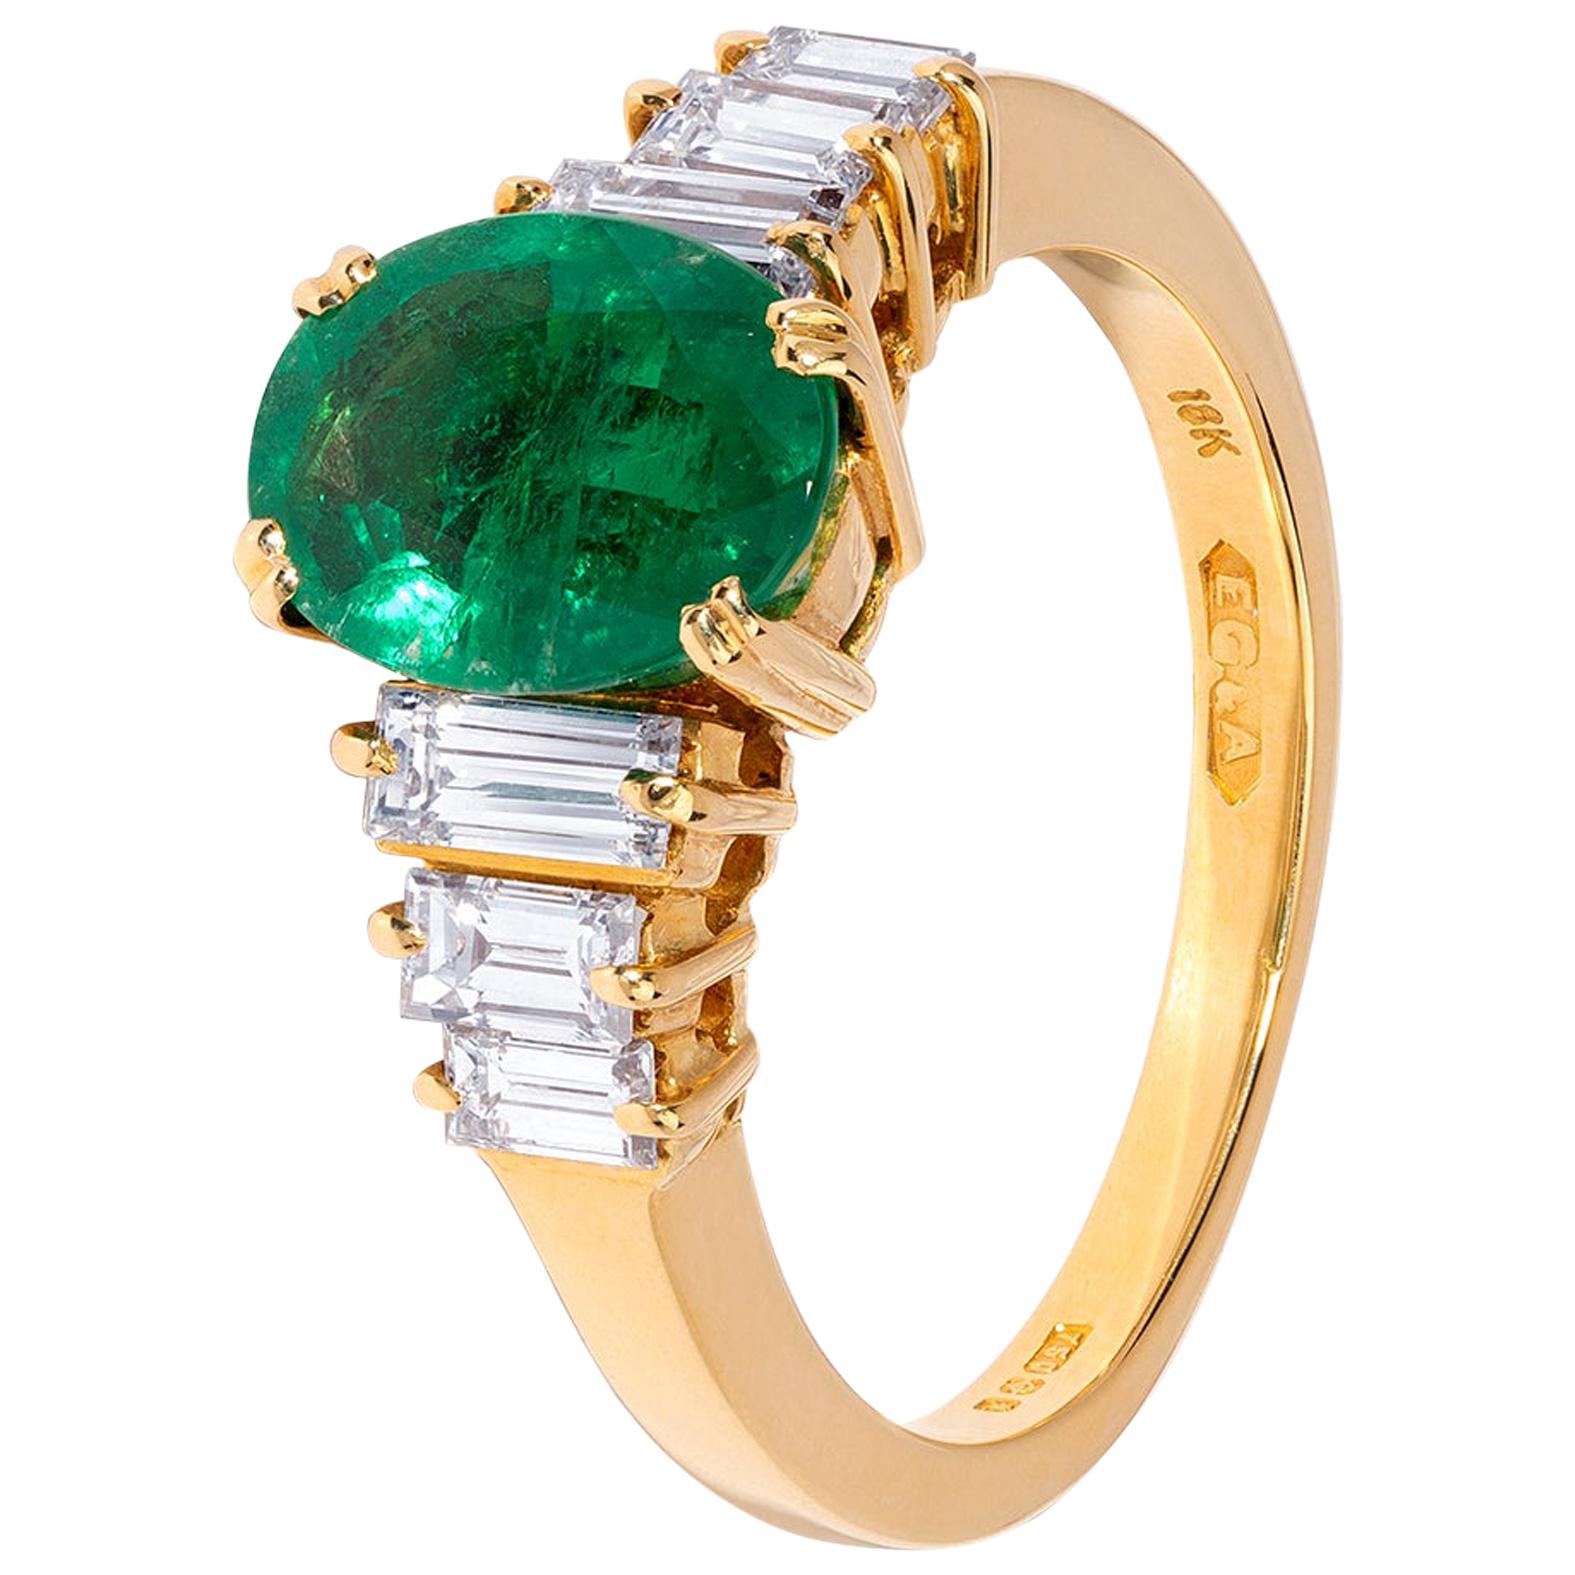 Handmade Emerald Ring with Baguette Diamond Detail in Yellow Gold